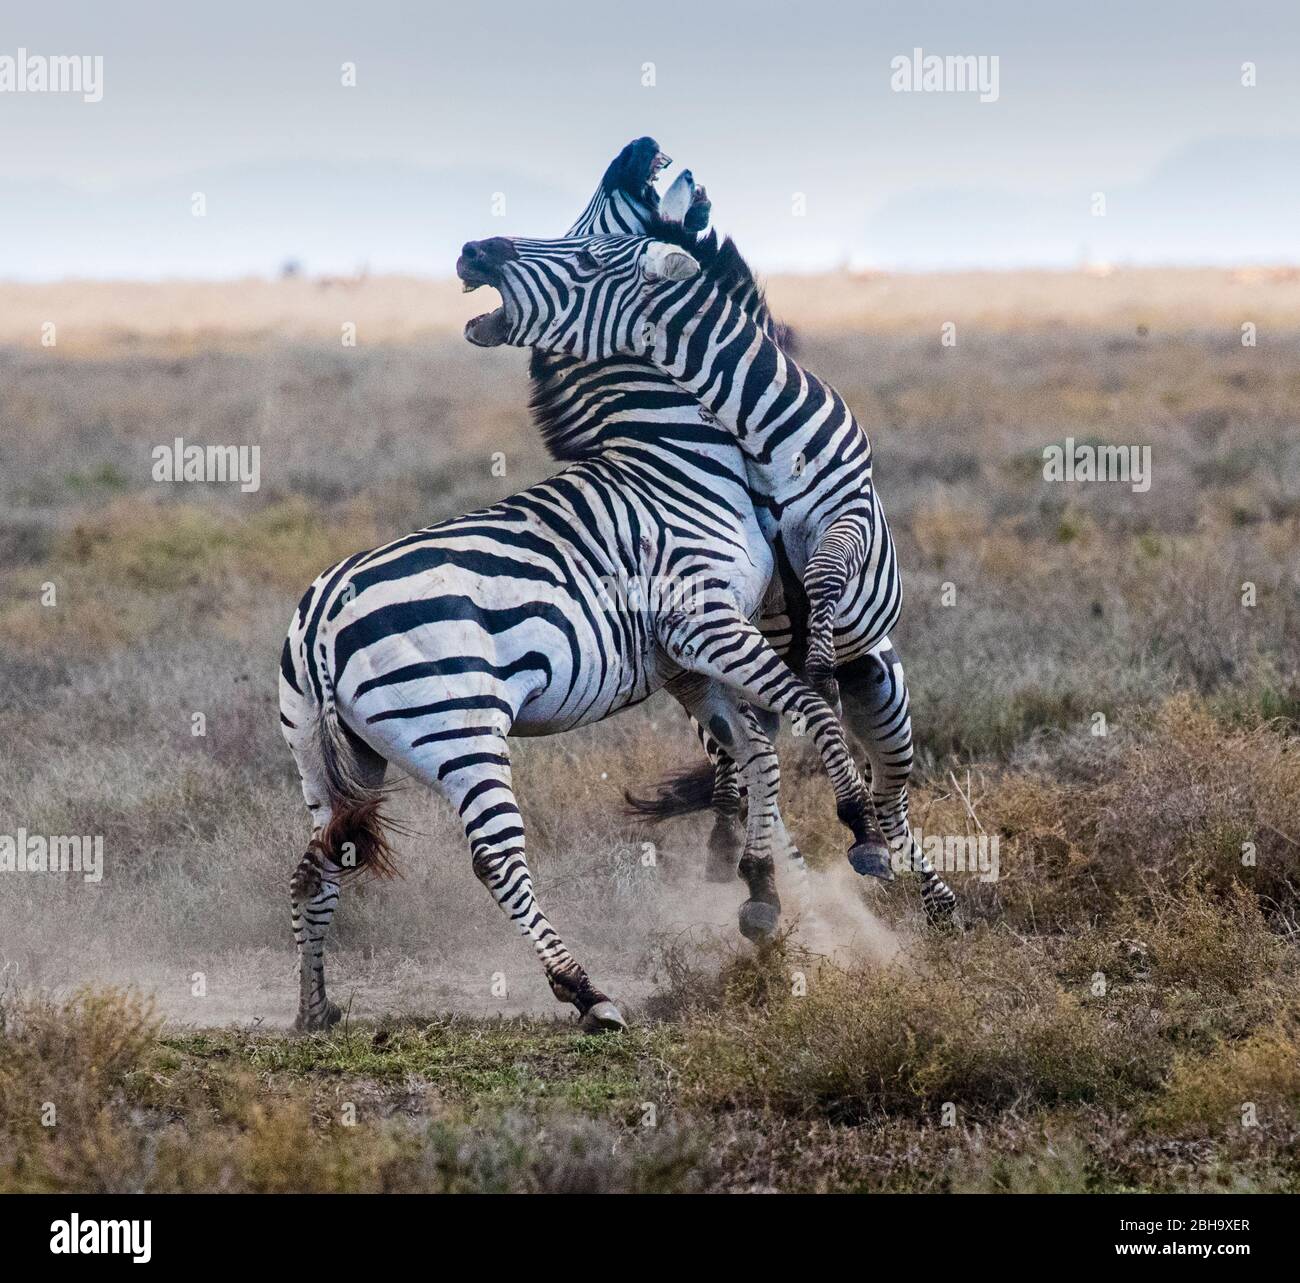 View of two zebras in fight on Savannah, Ngorongoro Conservation Area, Tanzania, Africa Stock Photo